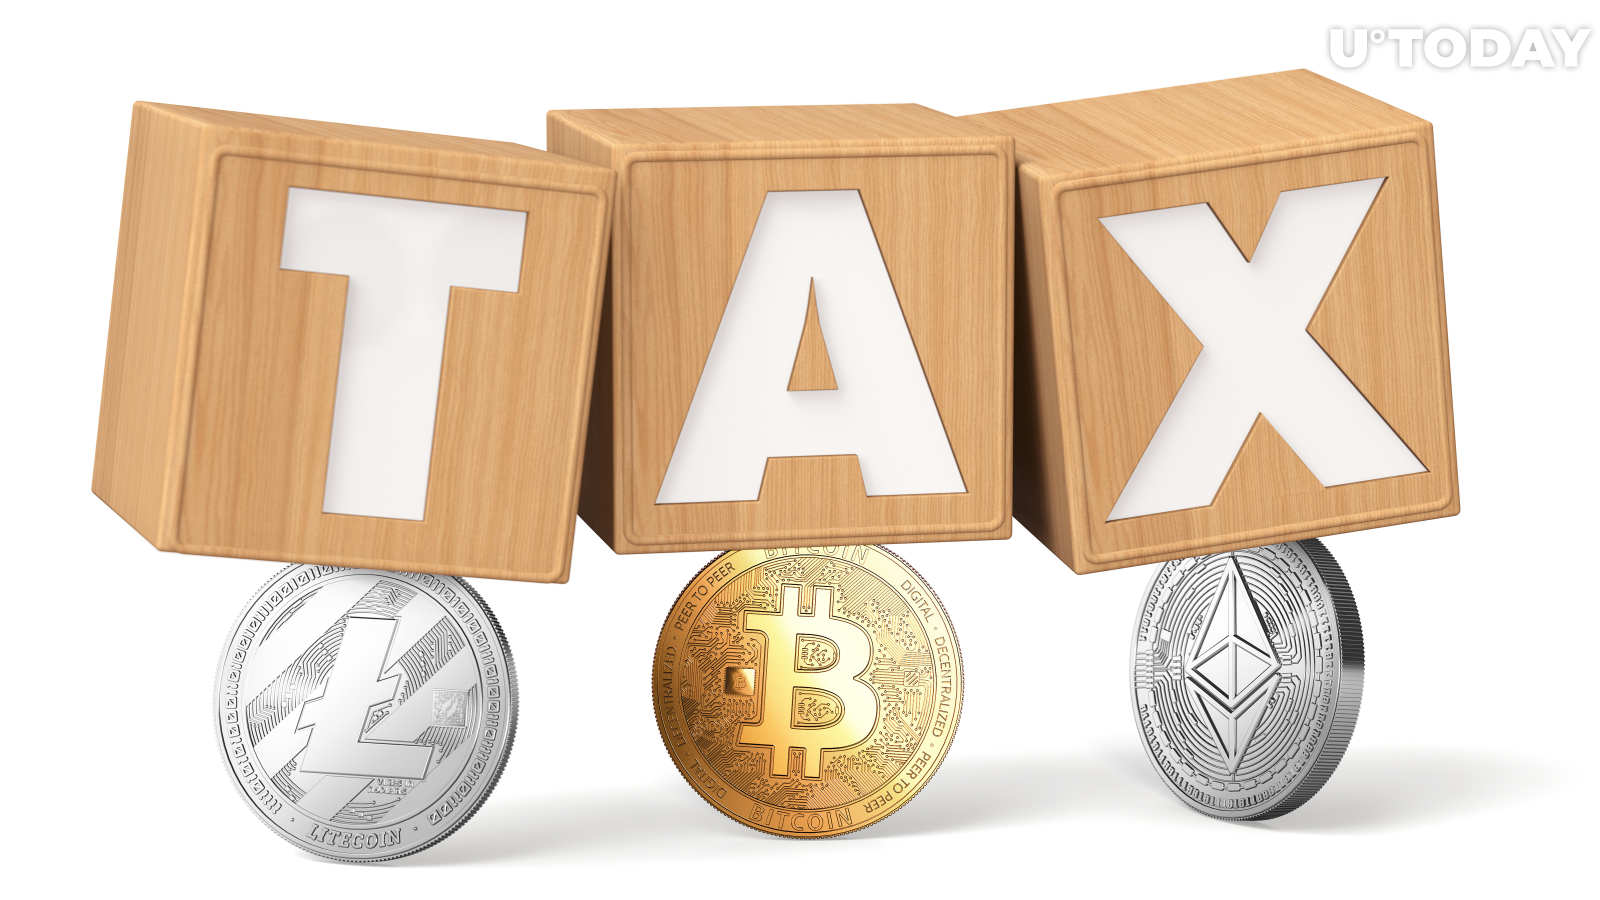 EU Country to Reduce Cryptocurrency Tax by 50 Percent to Attract "Billions" to Its Budget